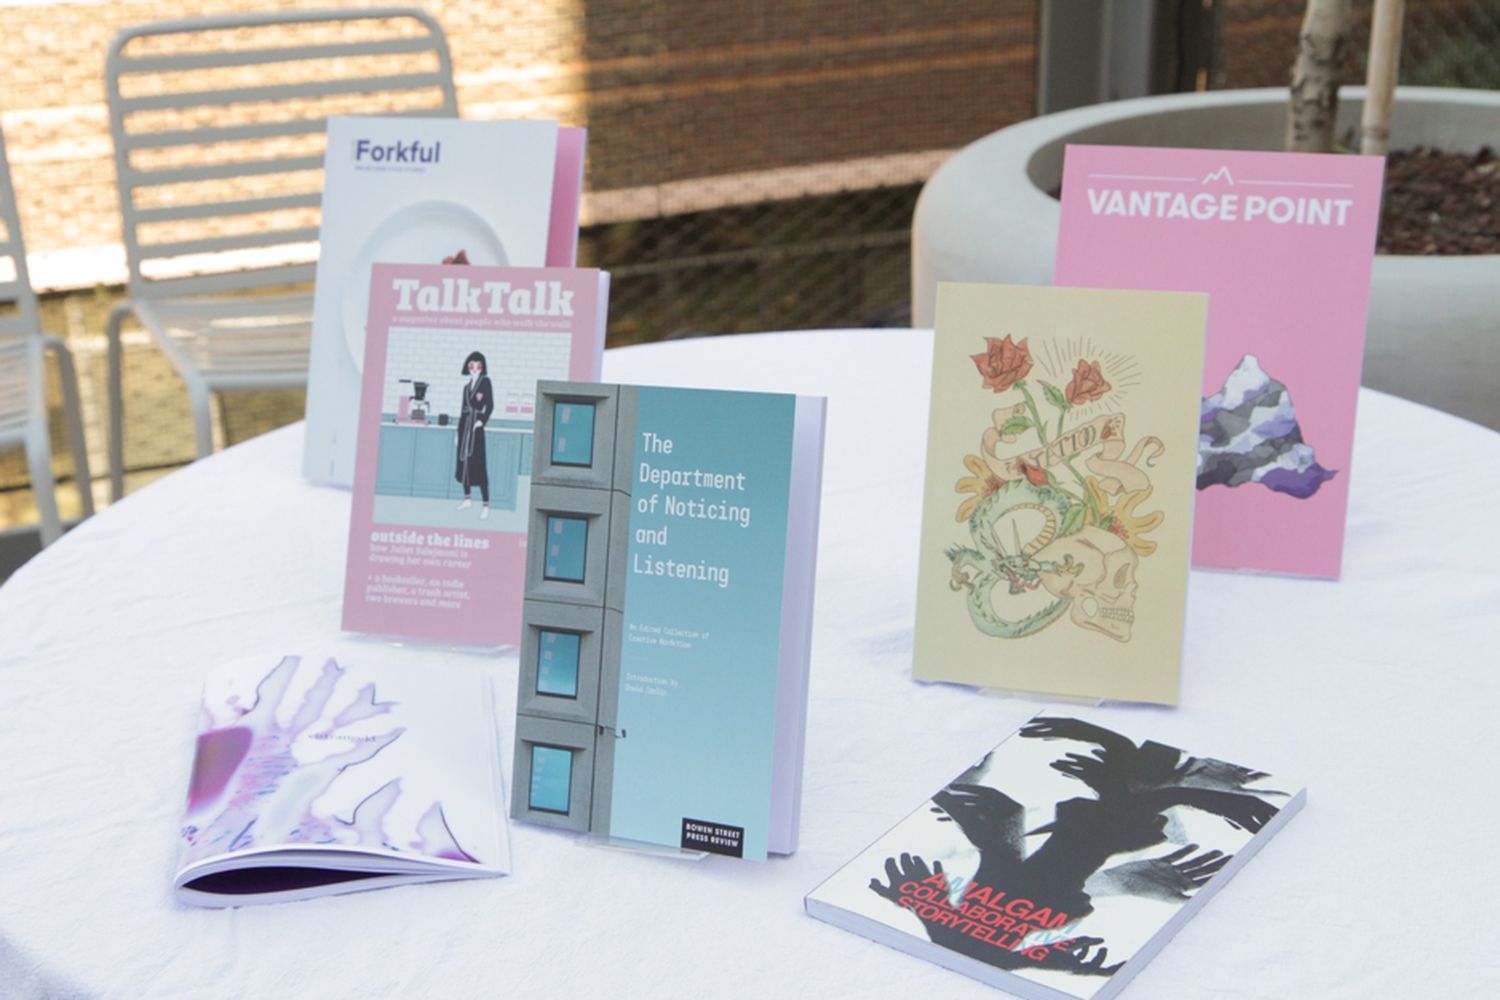 A white table with 7 magazines published by Bowen Street Press